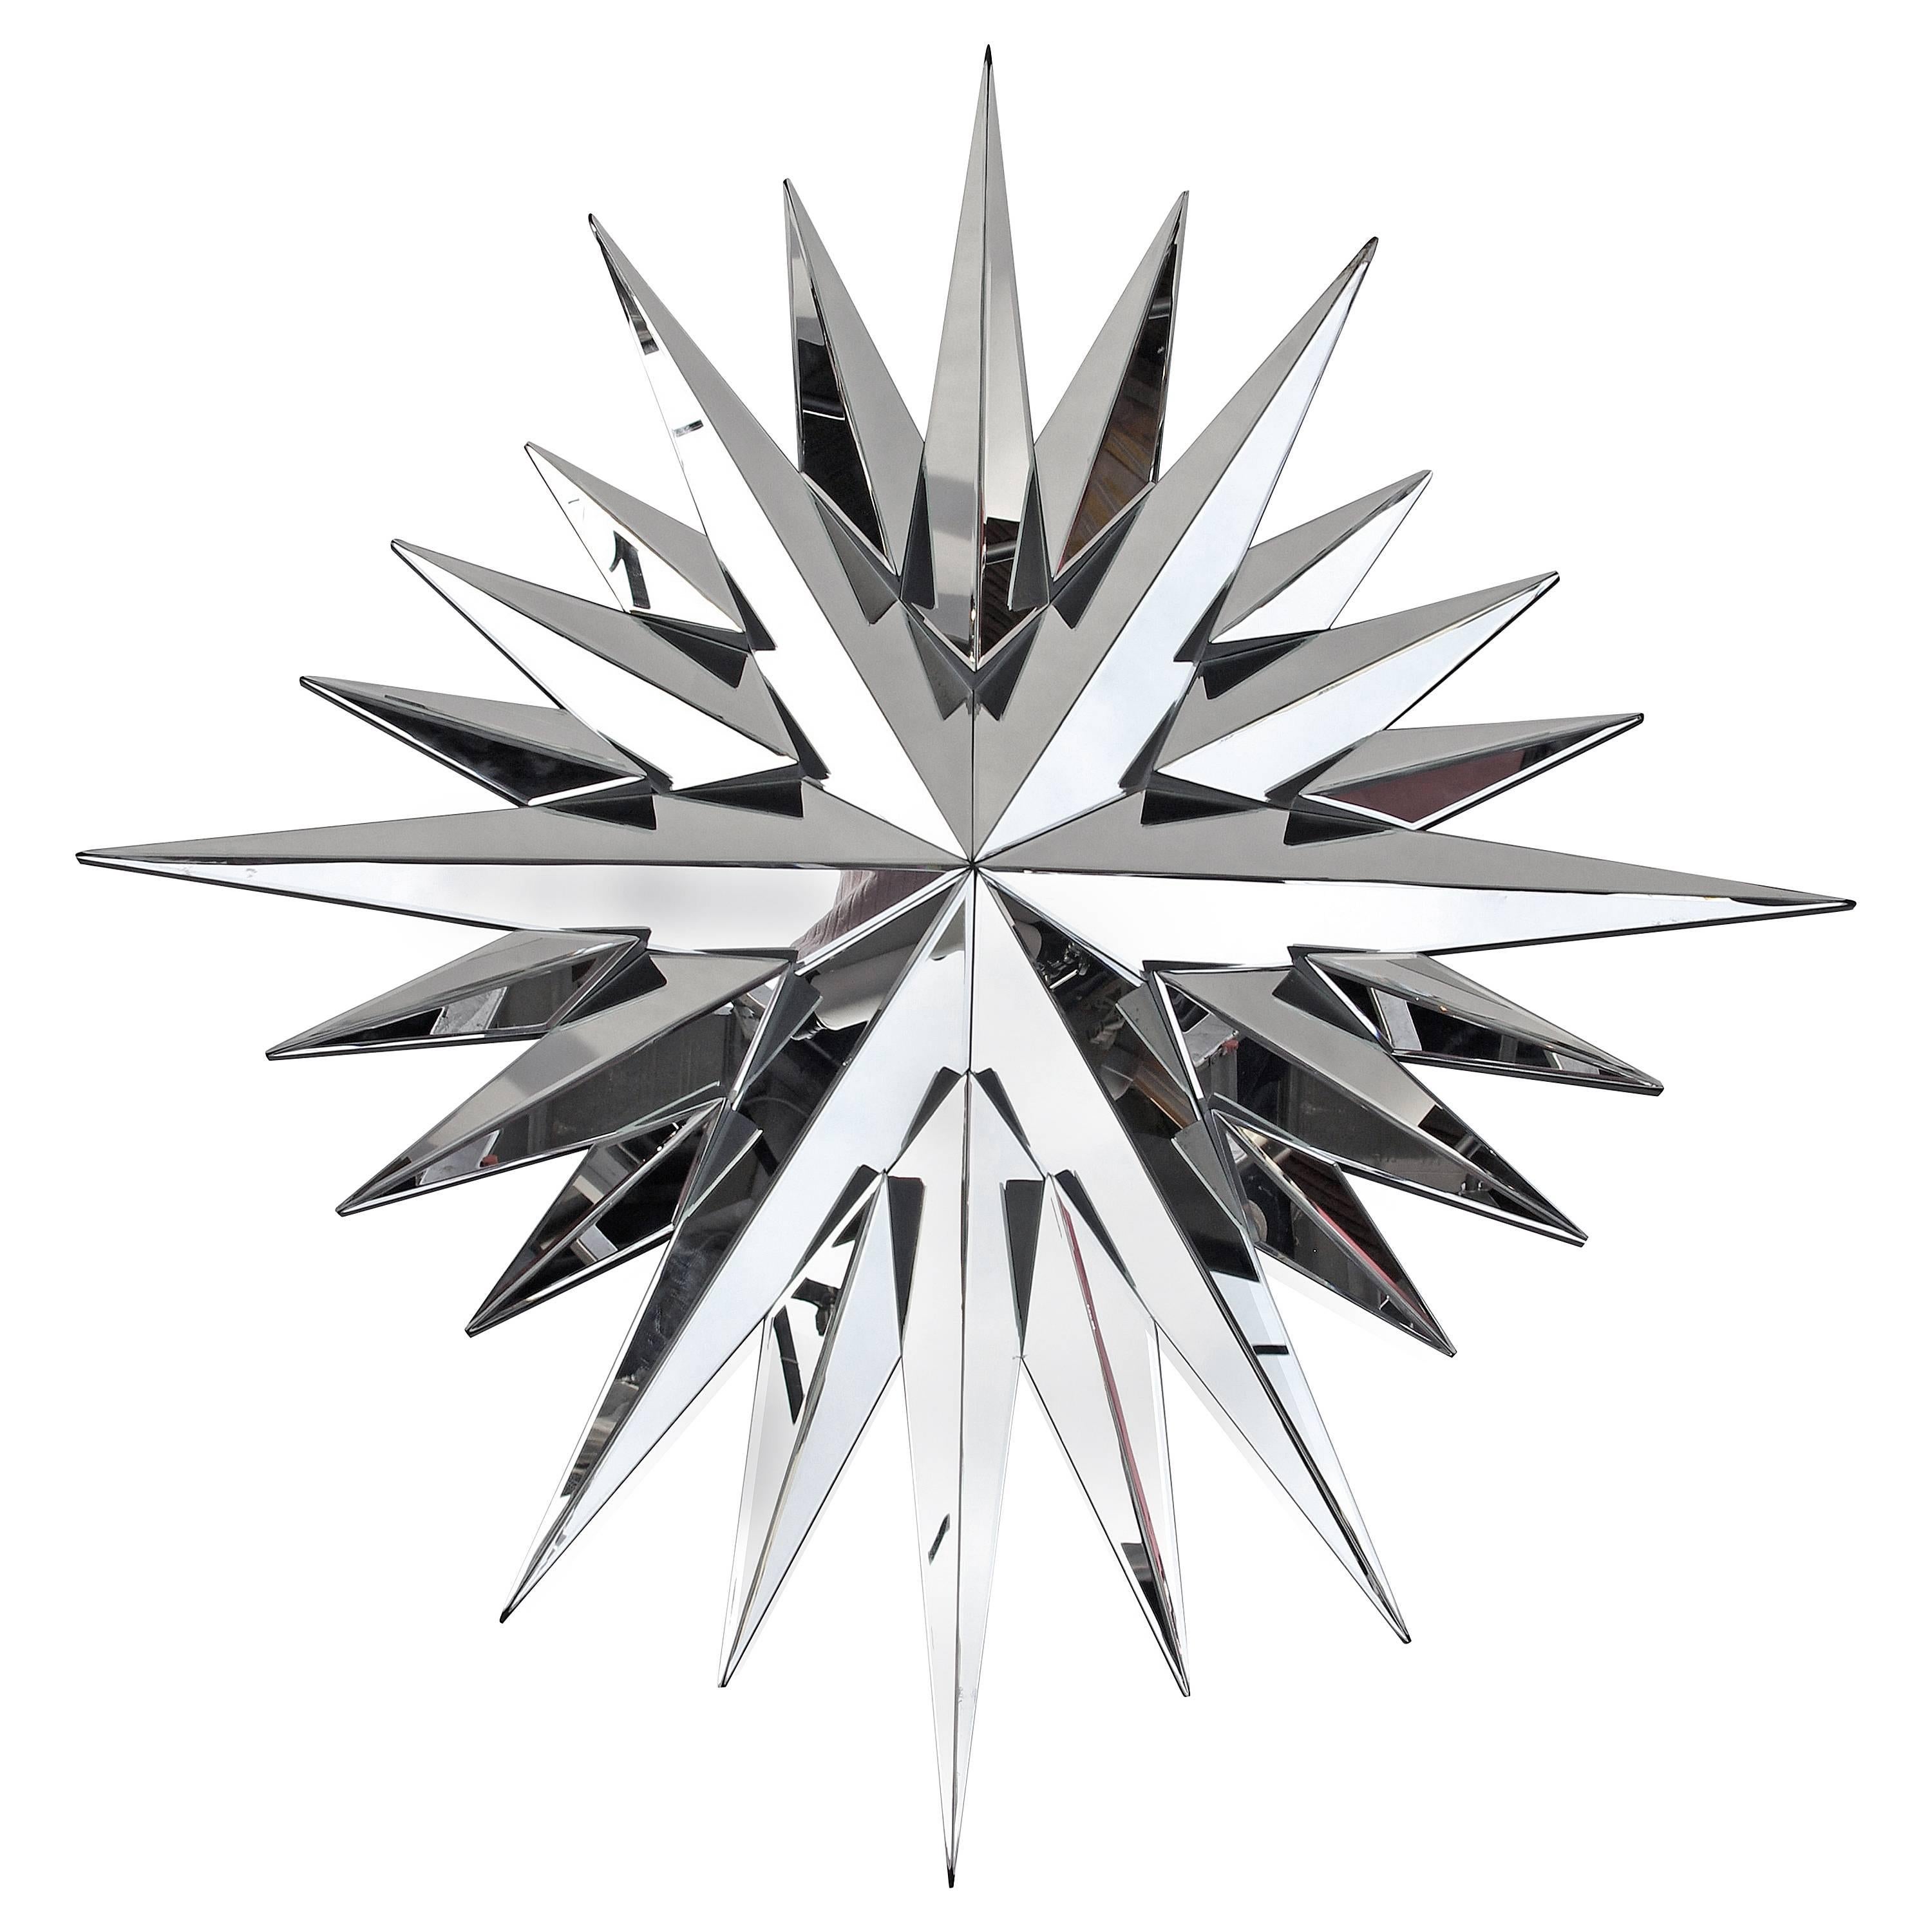 Faceted star-shaped mirror, contemporary work